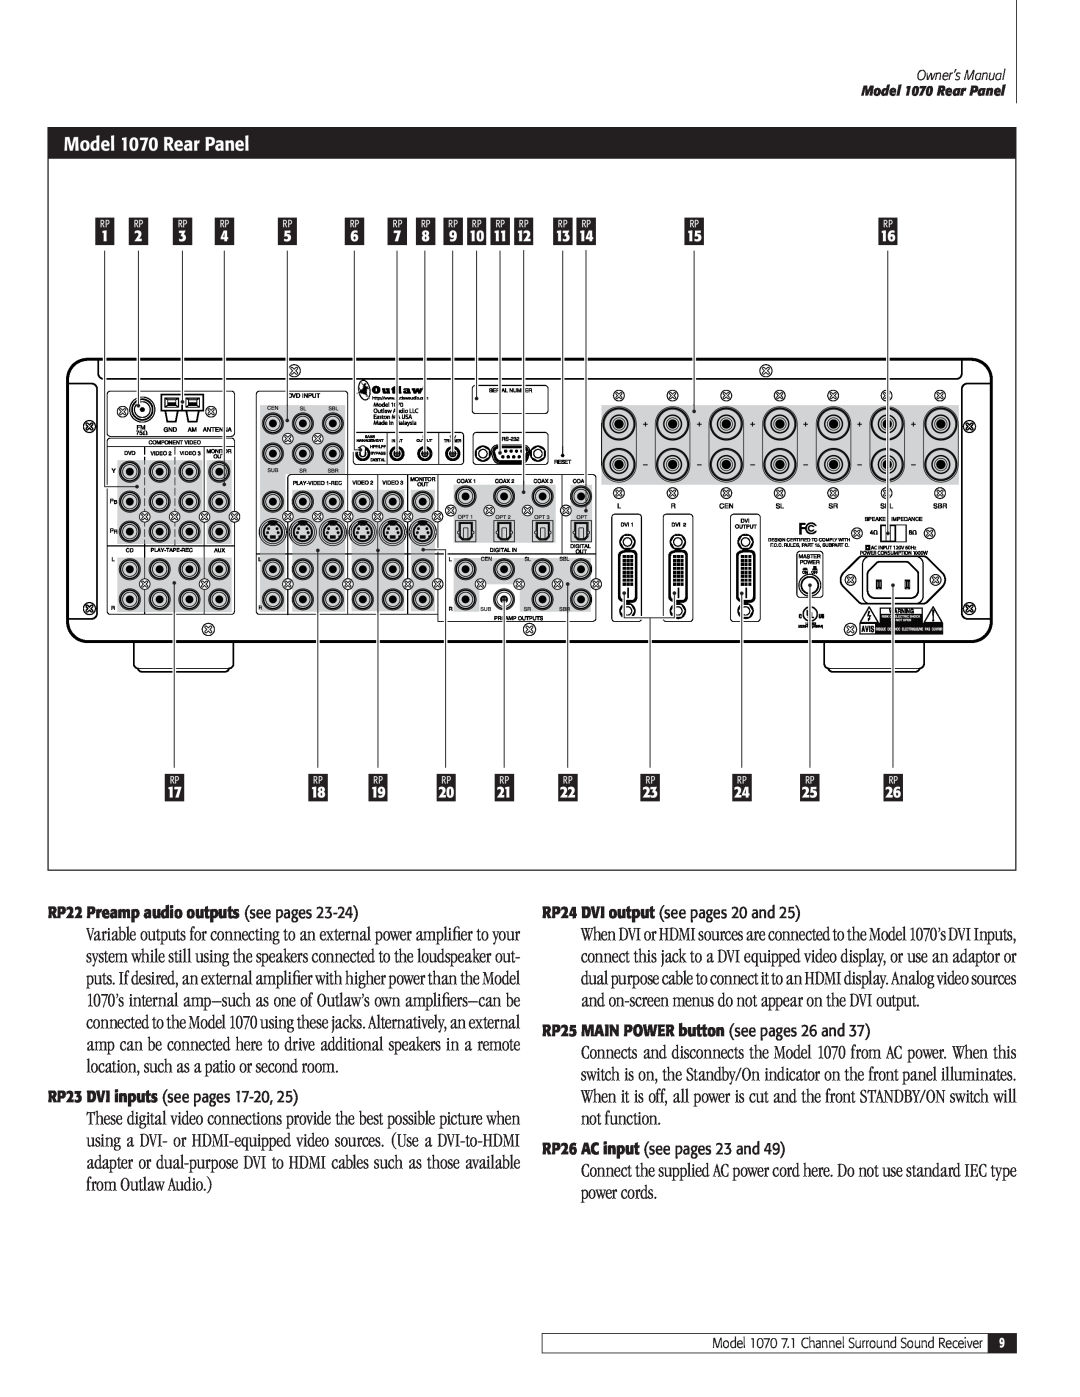 Outlaw Audio Model 1070 Rear Panel, RP22 Preamp audio outputs see pages, RP25 MAIN POWER button see pages 26 and 